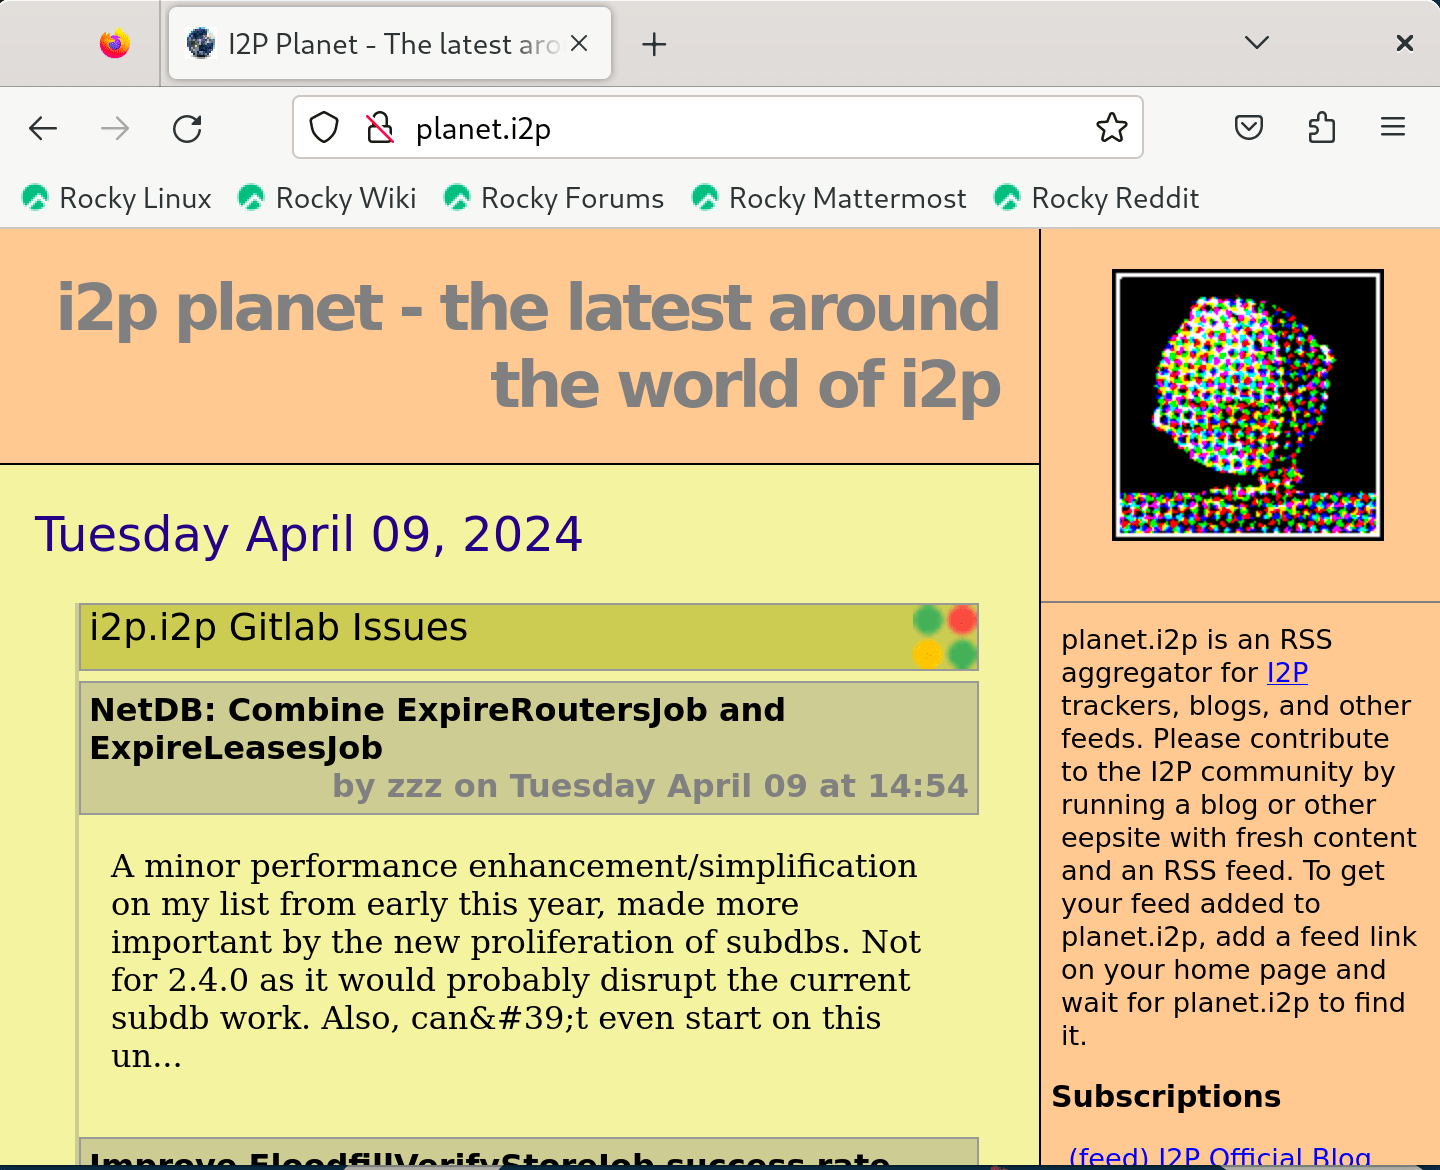 Firefox viewing planet.i2p